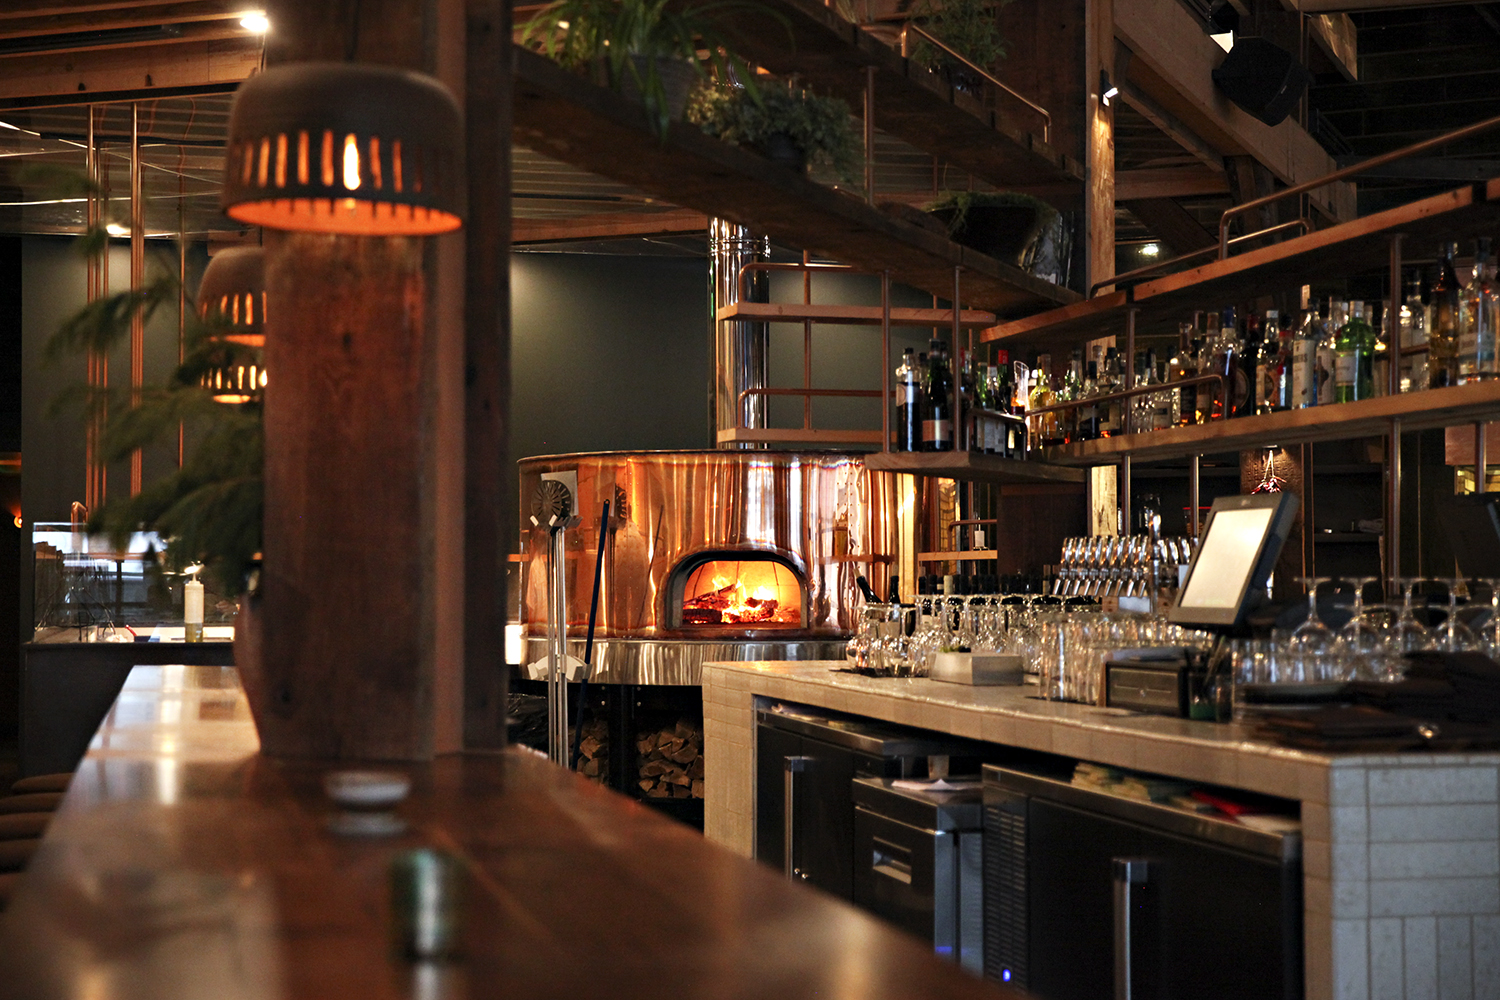 A large copper pizza oven in the background, and a wooden bar in the foreground.